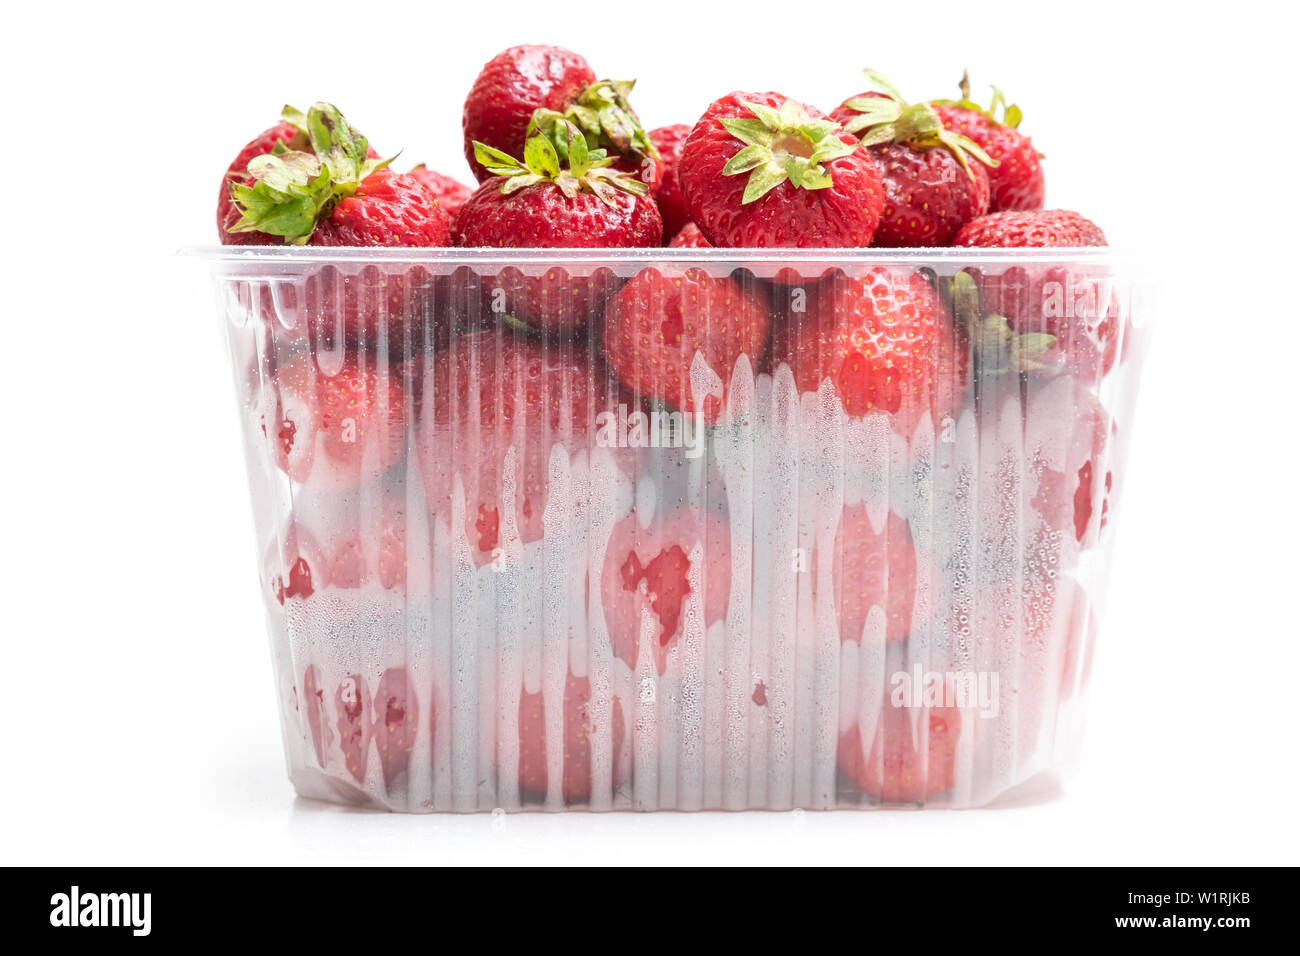 Description: strawberry in plastic transparent container box, isolated on white background Stock Photo